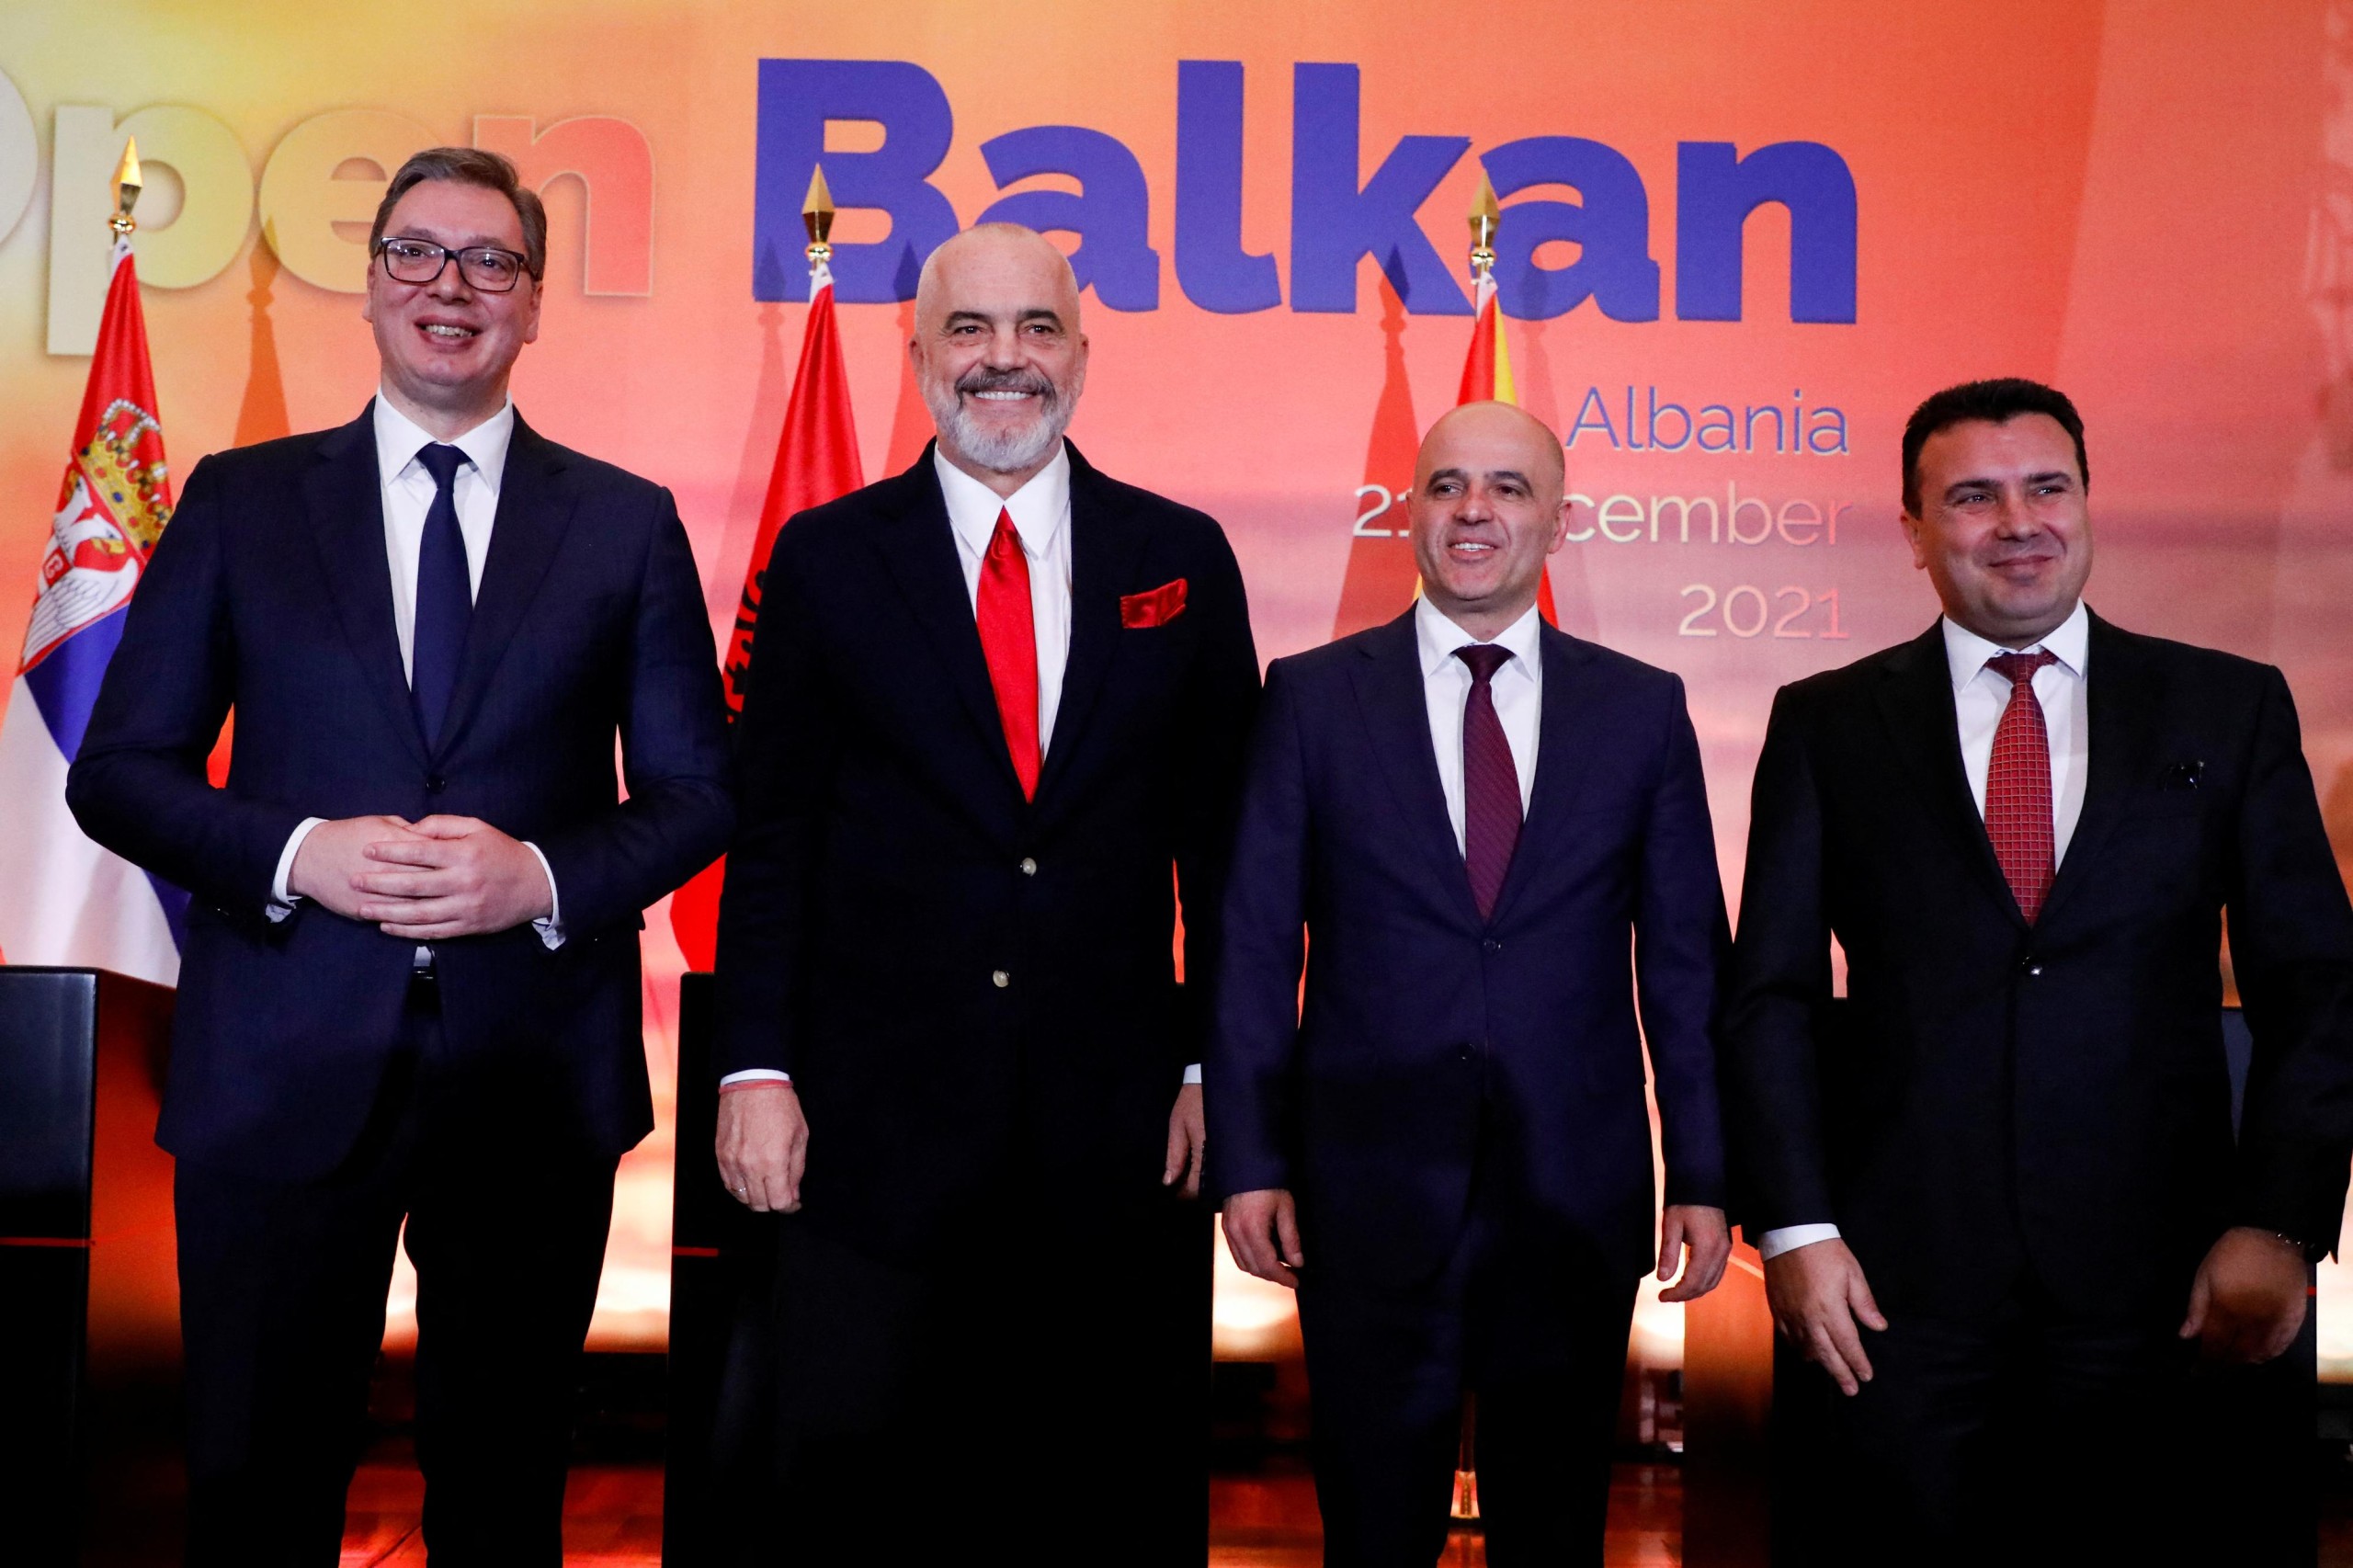 Serbian Prime Minister Aleksandar Vucic, Albanian Prime Minister Edi Rama, Deputy Minister of Finance of North Macedonia Dimitar Kovacevski and North Macedonia's Prime Minister Zoran Zaev pose for a picture after a press conference of the Open Balkan summit at the Palace of Brigades in Tirana, Albania December 21, 2021. REUTERS/Florion Goga Photo: Florion Goga/REUTERS